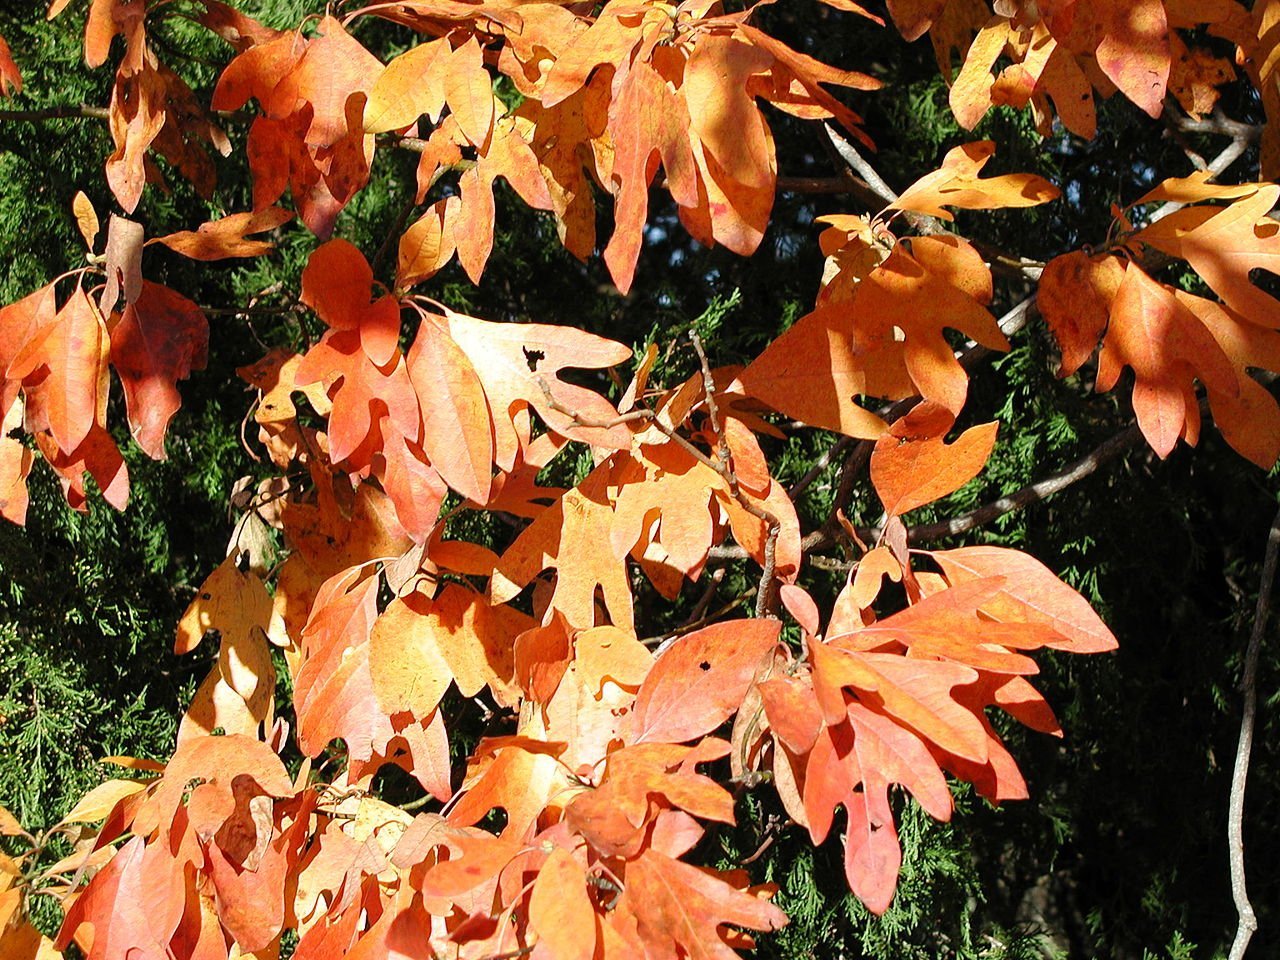 trees with red leaves, fall color trees, yellow leaf trees, autumn trees, maple trees in fall, best trees for fall color, trees that turn red in fall, trees that change color, orange leaf tree, trees in fall, trees in the fall, trees with yellow leaves in fall, colorful trees, red fall leaves, tree in fall, red trees names, trees with red leaves in fall, trees with red leaves all year, trees in autumn, trees that turn yellow in fall, fall maple leaf, maple tree colors, what trees turn red in fall, red trees in fall, beautiful fall trees, trees with colorful leaves, pretty trees in fall, maple tree with orange leaves, most beautiful fall trees, autumn trees and leaves, trees with beautiful fall color, trees that have red leaves all year, tree with white leaves in fall, trees that have red leaves in fall, golden leaf tree species, trees that are red all year, yellow foliage trees, what kind of trees change color in t he fall, trees that leaves turn yellow in fall, trees with bright red leaves in fall , tree color, trees with red leaves year round, a tree in fall, best autumn trees, colorful trees to plant, bright colored trees, orange autumn leaves, red tree types, best fall trees, orange colored trees, oak tree in fall, what maple tree has yellow leaves in the fall, tree foliage, what tree has red leaves, what color do maple trees turn in the fall, pretty leaves, fall leaves tree, what color do maple leaves turn in the fall, tree in the fall, orange fall leaves, trees with red leaves all summer, colors of autumn, fall blooming trees, yellow maple tree, yellow maple leaves in fall, tree with orange leaves in spring, trees in autumn season, colorful autumn trees, which tree changes colors of its leaves, trees with red leaves in summer, colorful shade trees, red foliage trees, bright red trees, yellow fall leaves, orange leaf maple tree, colorful tree types, first trees to change color in fall, small trees that turn red in fall, what trees have leaves that turn red in the fall, trees that leaves change color, purple fall leaves, tree with small yellow leaves in fall, sugar maple fall color, purple leaf maple, best maple trees, orange maple tree, trees with bright fall colors, autumn tree leaves, purple fall foliage, trees with orange fall color, what trees have red leaves, maple tree that turns bright red in fall, red and orange leaves, names of trees with red leaves, what trees have yellow leaves in the fall, leaves in fall, red fall leaf, trees changing colors, fall flowering trees, orange foliage, birch trees in fall, pictures of fall trees, big autumn tree, fall trees images, colourful trees, river birch fall color, bright yellow tree, leaves that turn yellow in fall, autumn yellow, colorful fall foliage, season tree beauty, beautiful colorful trees, purple autumn, colorful autumn, yellow trees images, fall leaf types, birch tree fall color, pretty fall pictures, good trees to plant in fall, autumn leaves pictures, yellow tree name, red autumn trees, autumn leaves name, types of fall leaves, colorful leaves, most colorful fall trees, trees with yellow fall color, fall foliage trees, red colored trees, trees that change colour in autumn, tree with pink flowers in fall, best trees to plant in fall, what trees change color in the fall, autumn tree display, trees in fall season, trees that turn orange in fall, beautiful autumn trees, redbud tree in fall, eastern redbud fall color, redbud in fall, yellow leaf bush, shrubs that turn red in fall, bushes that turn red in fall, fall color plants, eastern redbud tree in fall, fall shrubs, what color is a redbud tree, fall color shrubs, tree with yellow branches, tree colour, shrubs that change color in fall, bright fall pictures, pretty trees, small trees to plant in fall, forest pansy redbud fall color, bushes that turn red in autumn, bright red fall shrub, maple tree fall leaf color, bare fall tree, red bushes in fall, fall color landscaping, tree with white leaves in spring, tree with orange fruit in fall, tree with bright red berries in fall, a fall tree, color tree, tree with bright red flowers, trees with burgundy leaves, bush red leaves in fall, orange colored tree logo, maple tree fall colors, ash tree in fall, oak tree fall color, linden tree fall color, pecan tree fall color